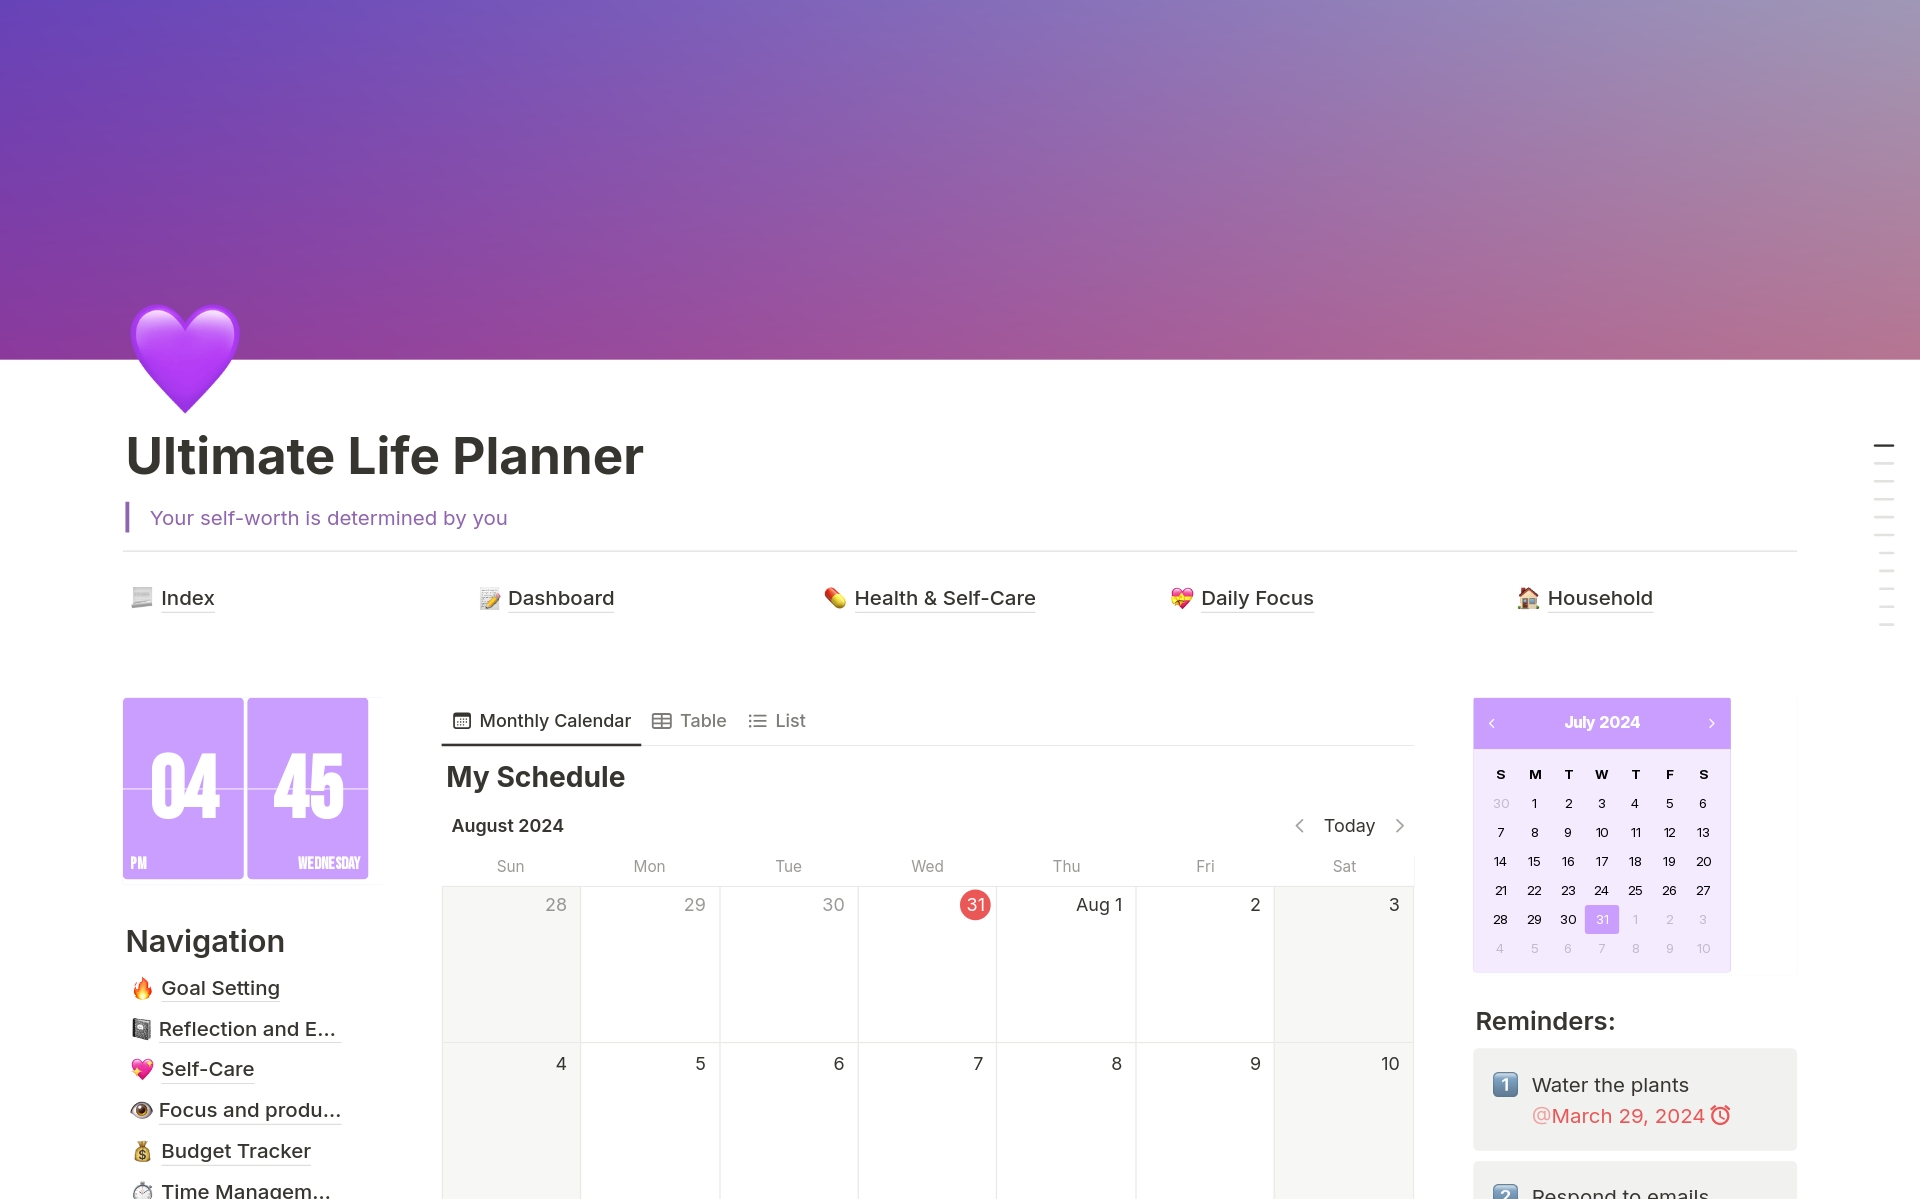 This Notion planner is beginner-friendly and easy to use, offering comprehensive and automated features. Combining beautiful design with top-notch functionality, it is perfect for setting goals, tracking your life, or staying organized. 